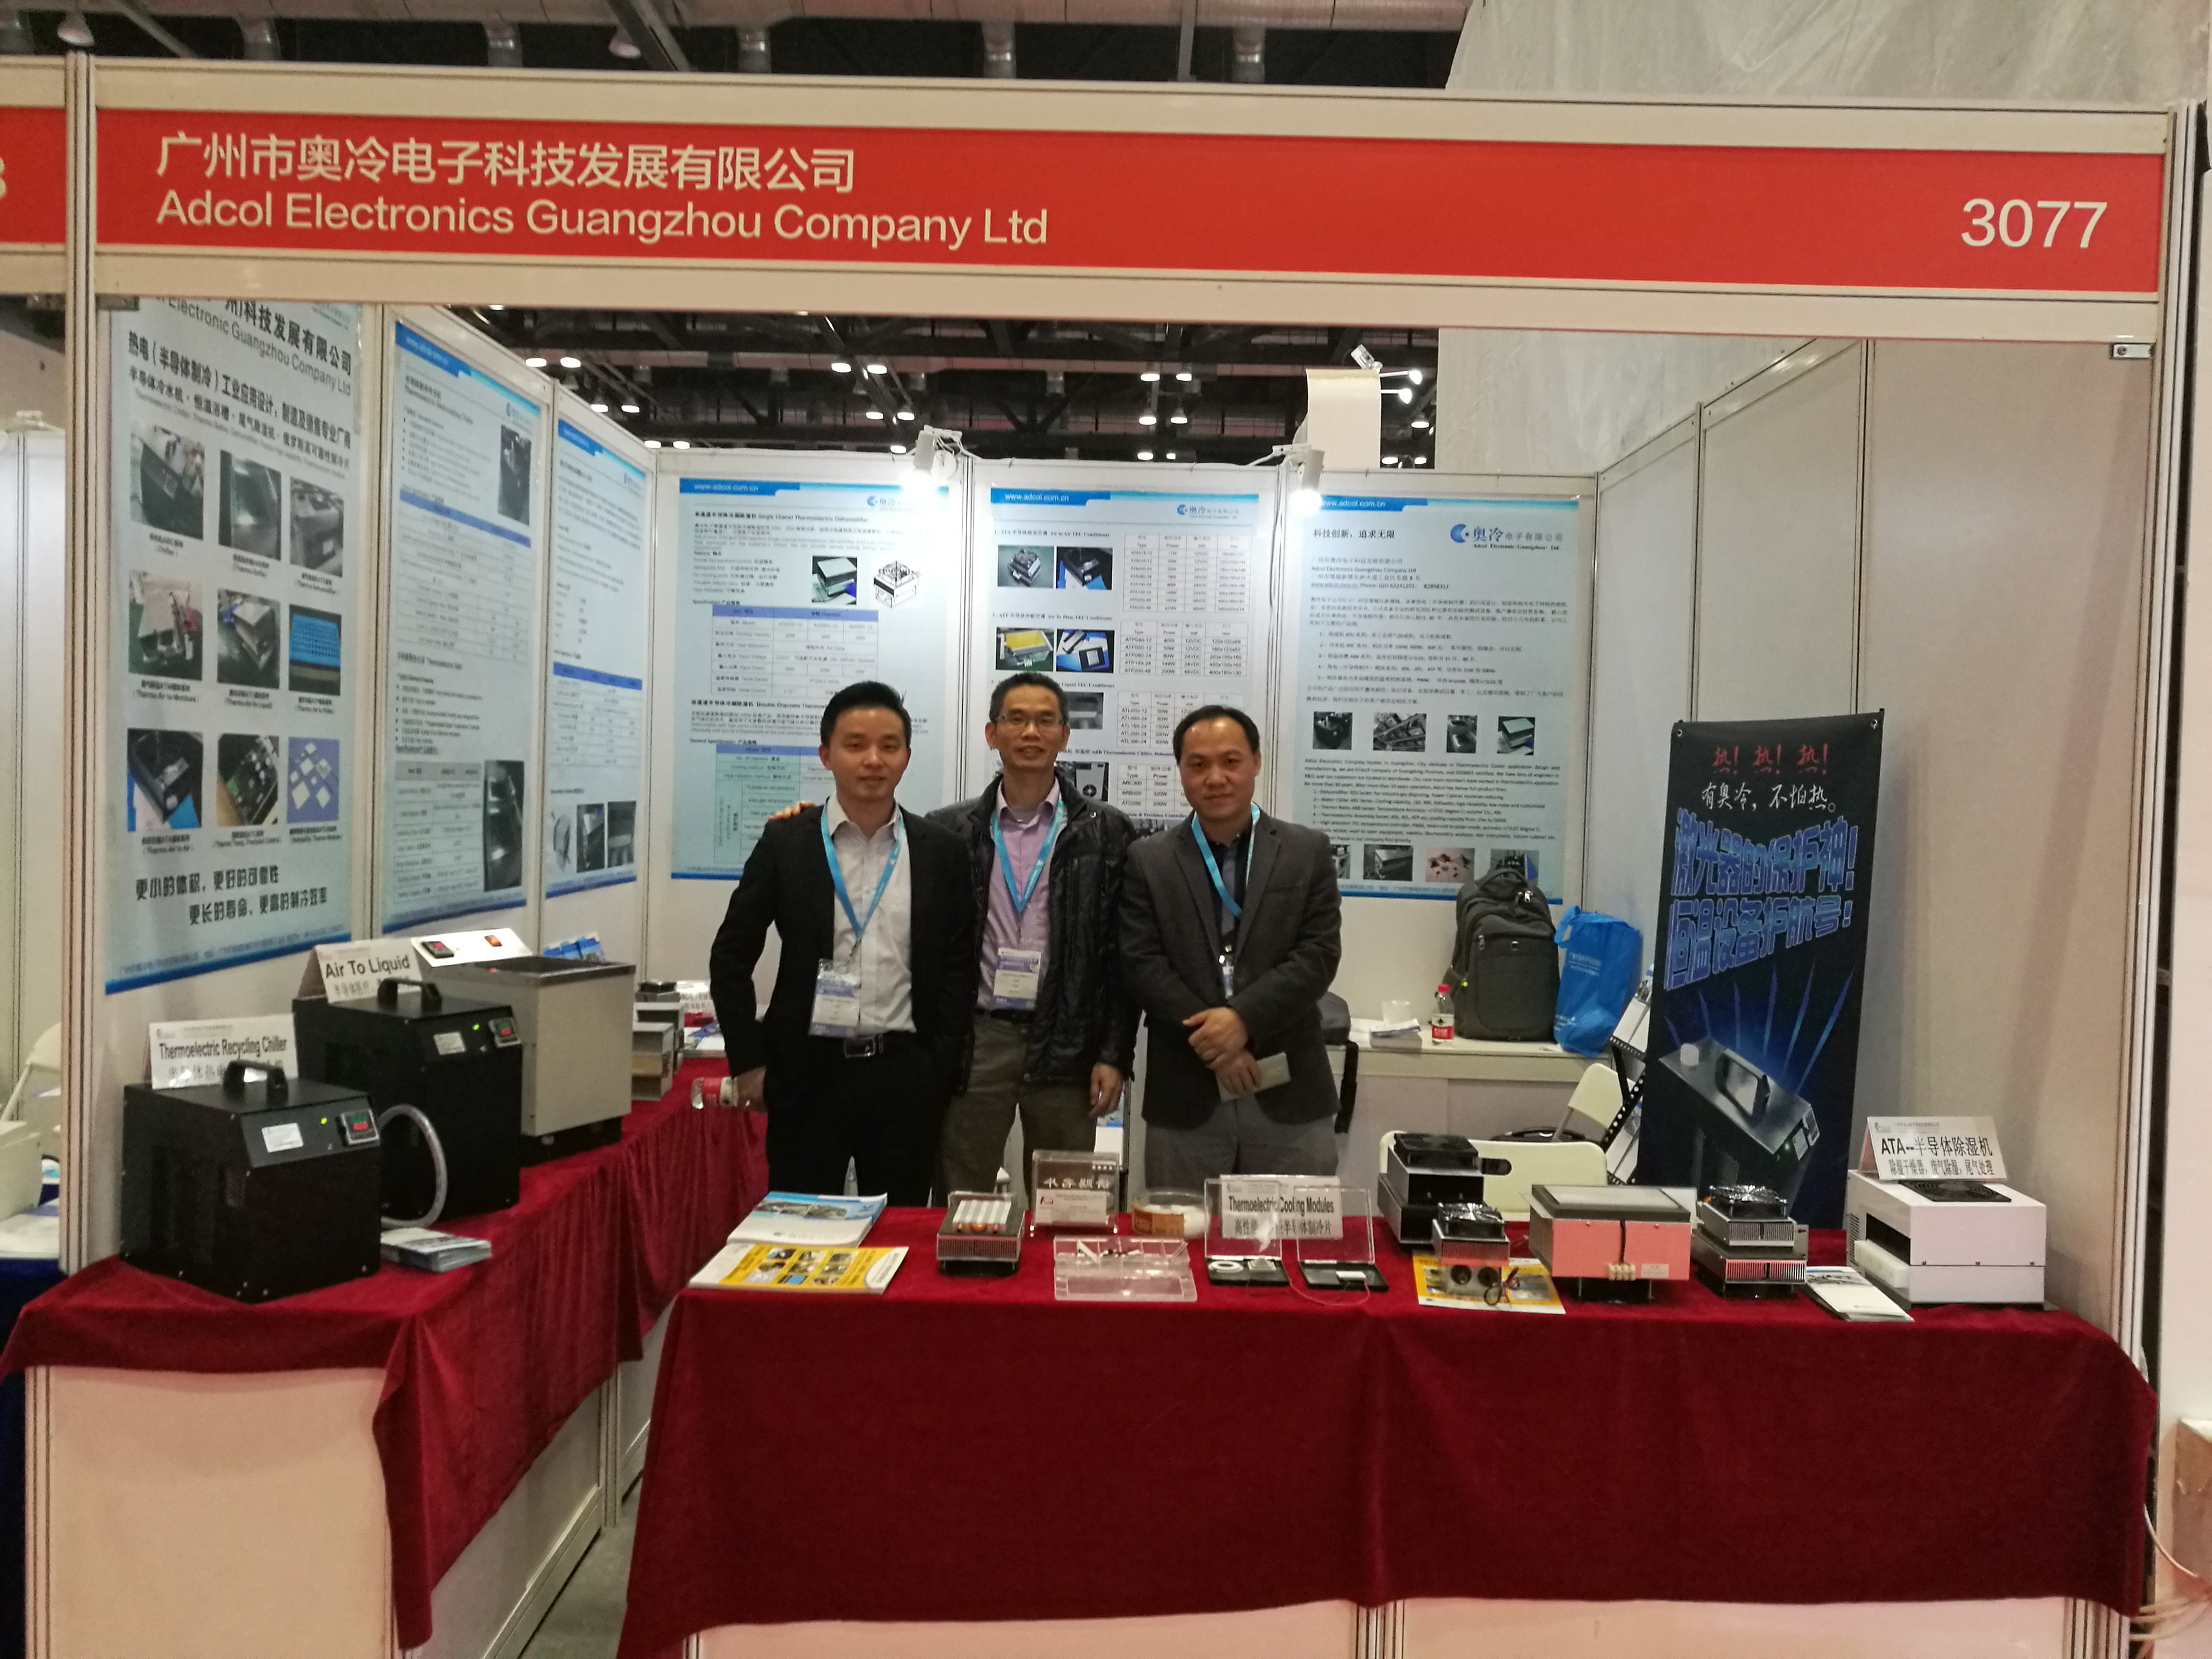 Adcol attended CISILE 2017 Beijing